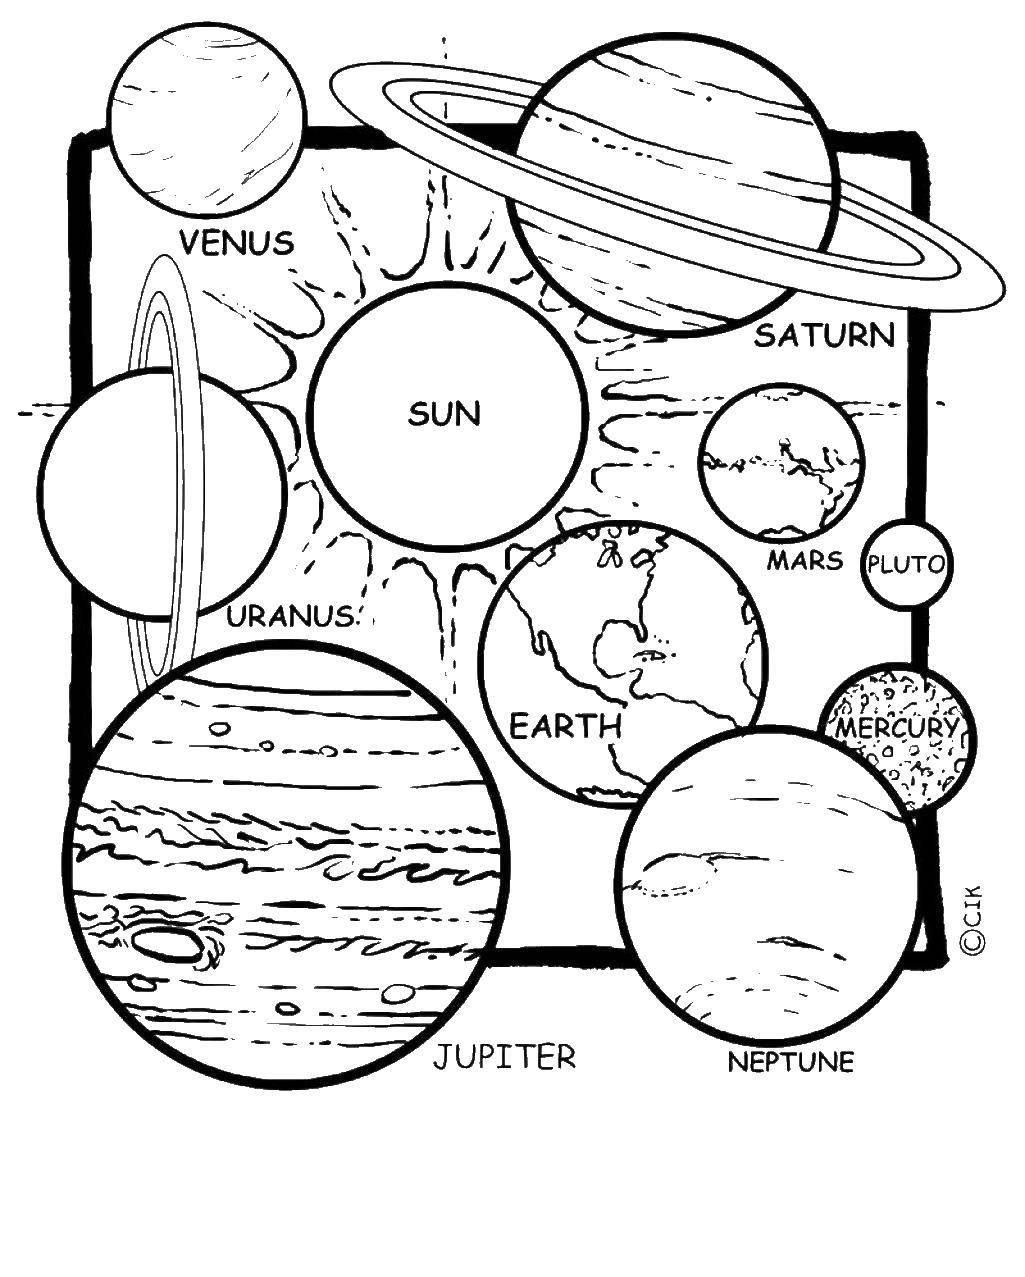 Coloring Planet in English. Category Space. Tags:  space.